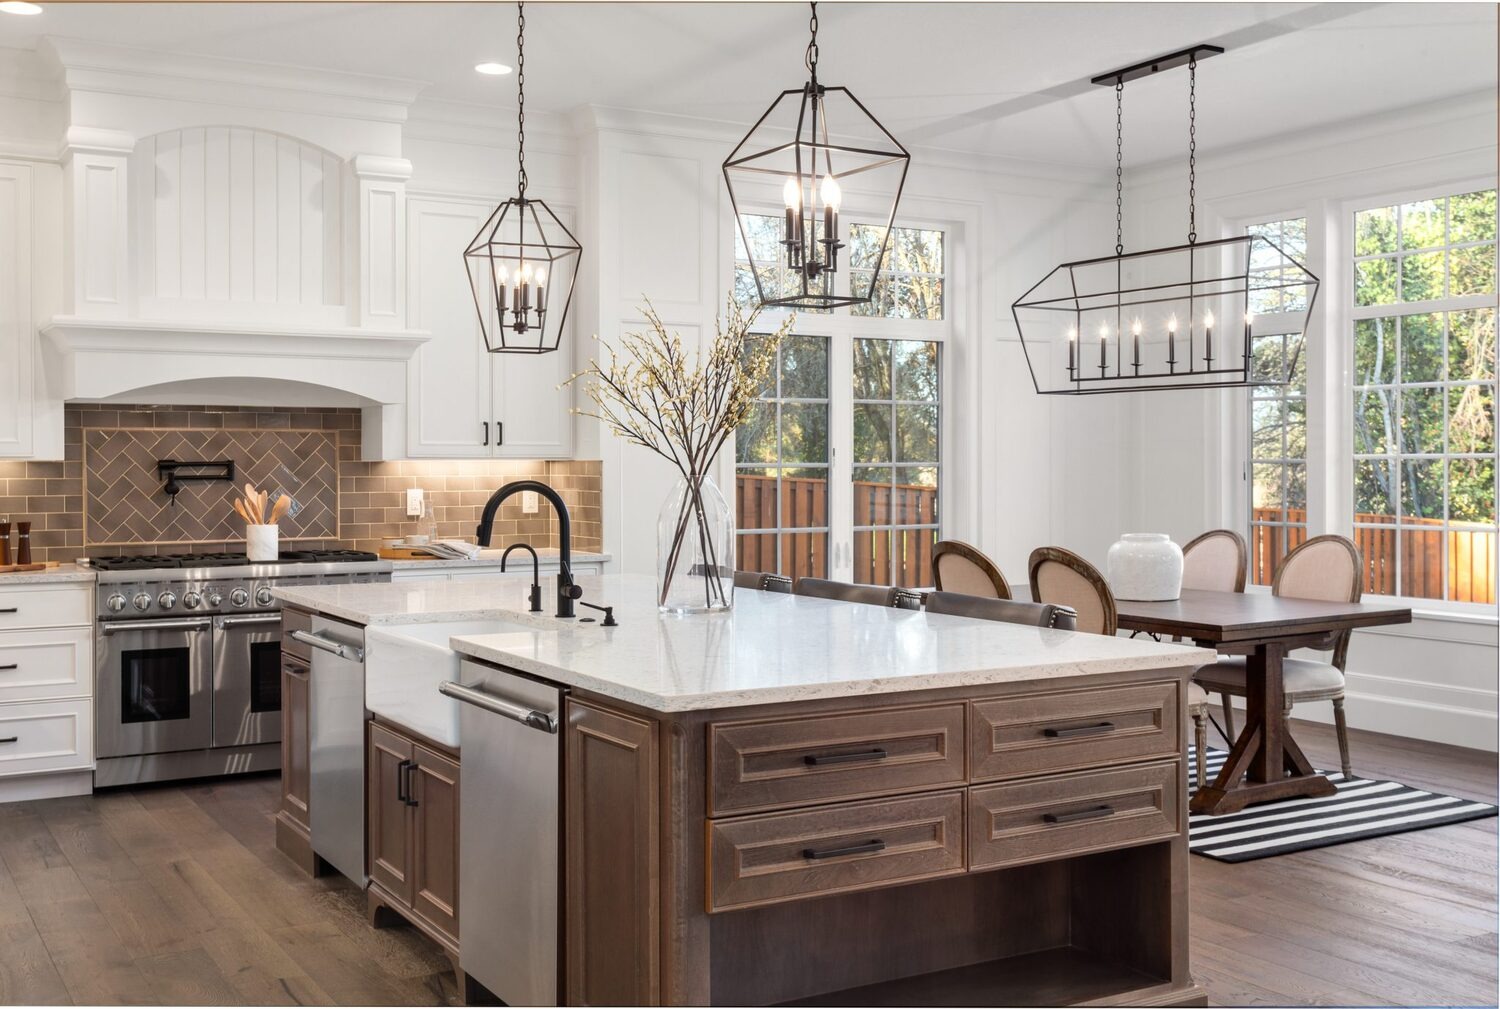 The kitchen's wooden features showcase the transformation achieved through a kitchen remodeling Deerfield project